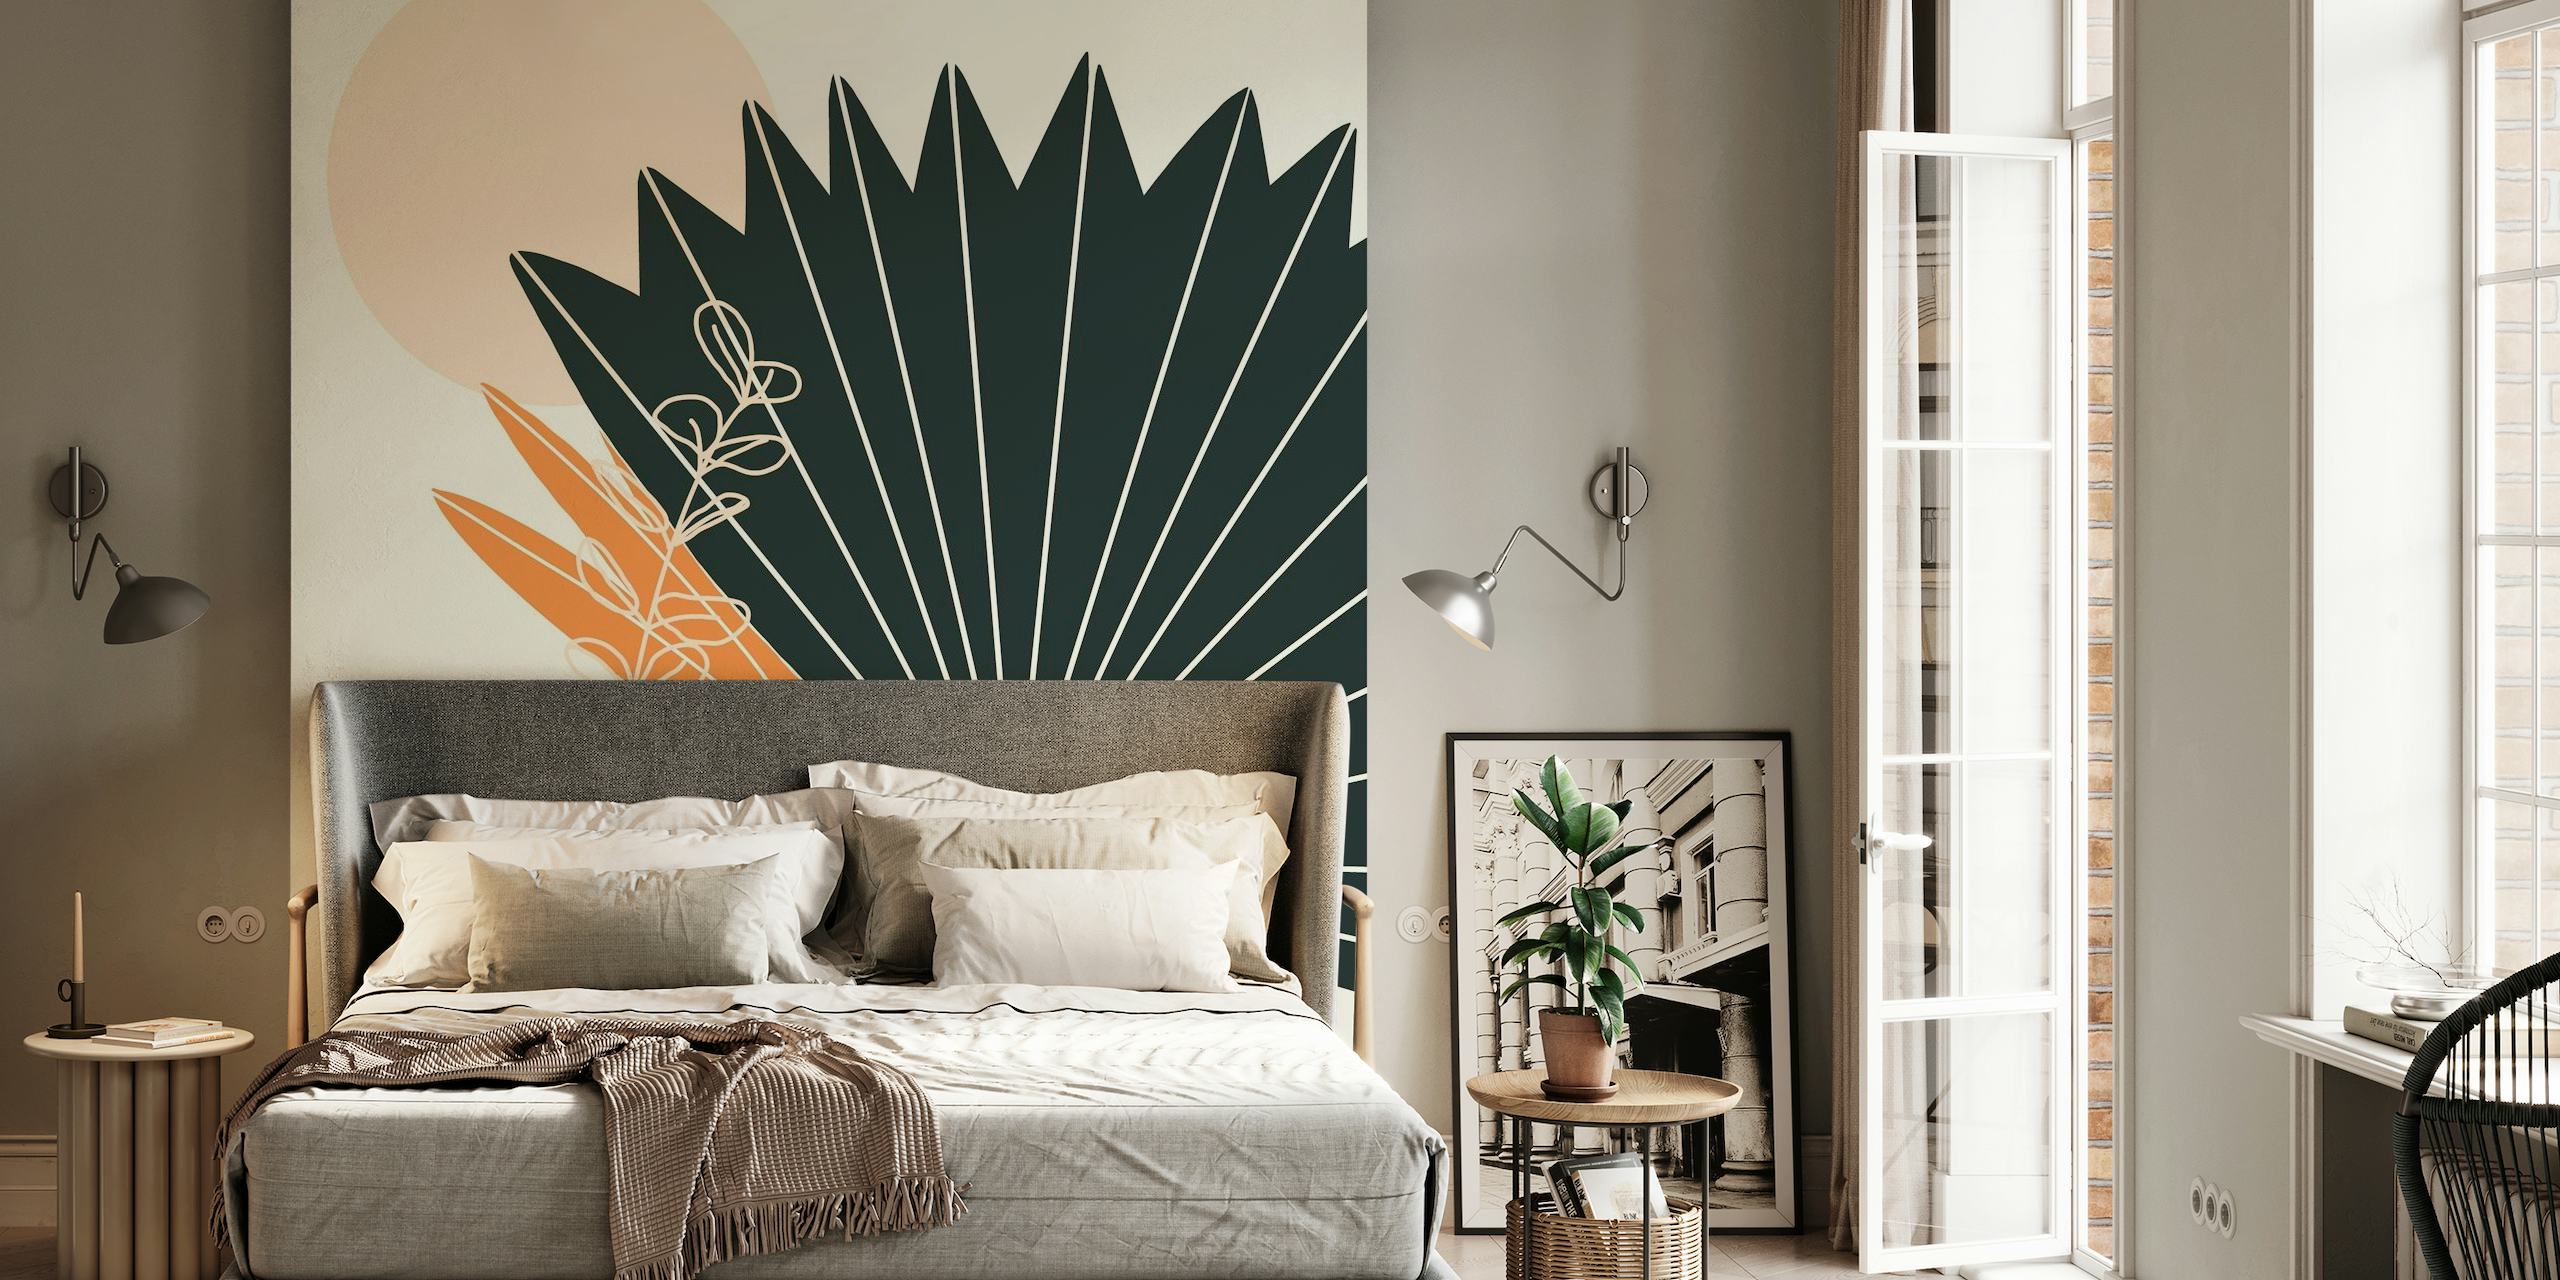 Abstract wall mural with stylized palm leaves and artisanal vase in earthy tones